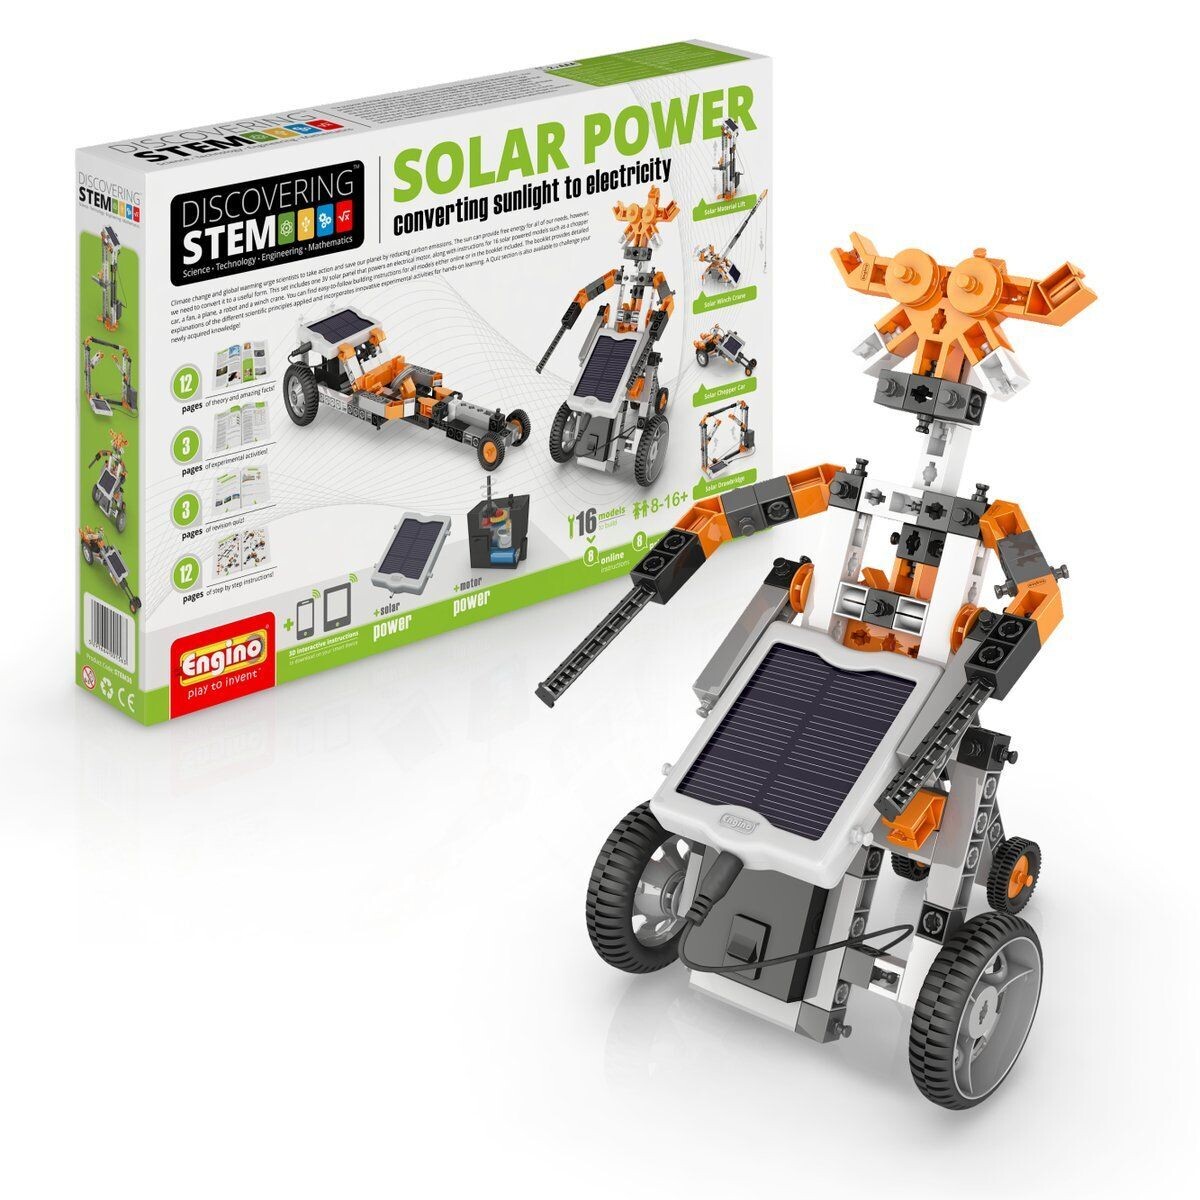 Engino Disovering STEM Solar Power with 16 models